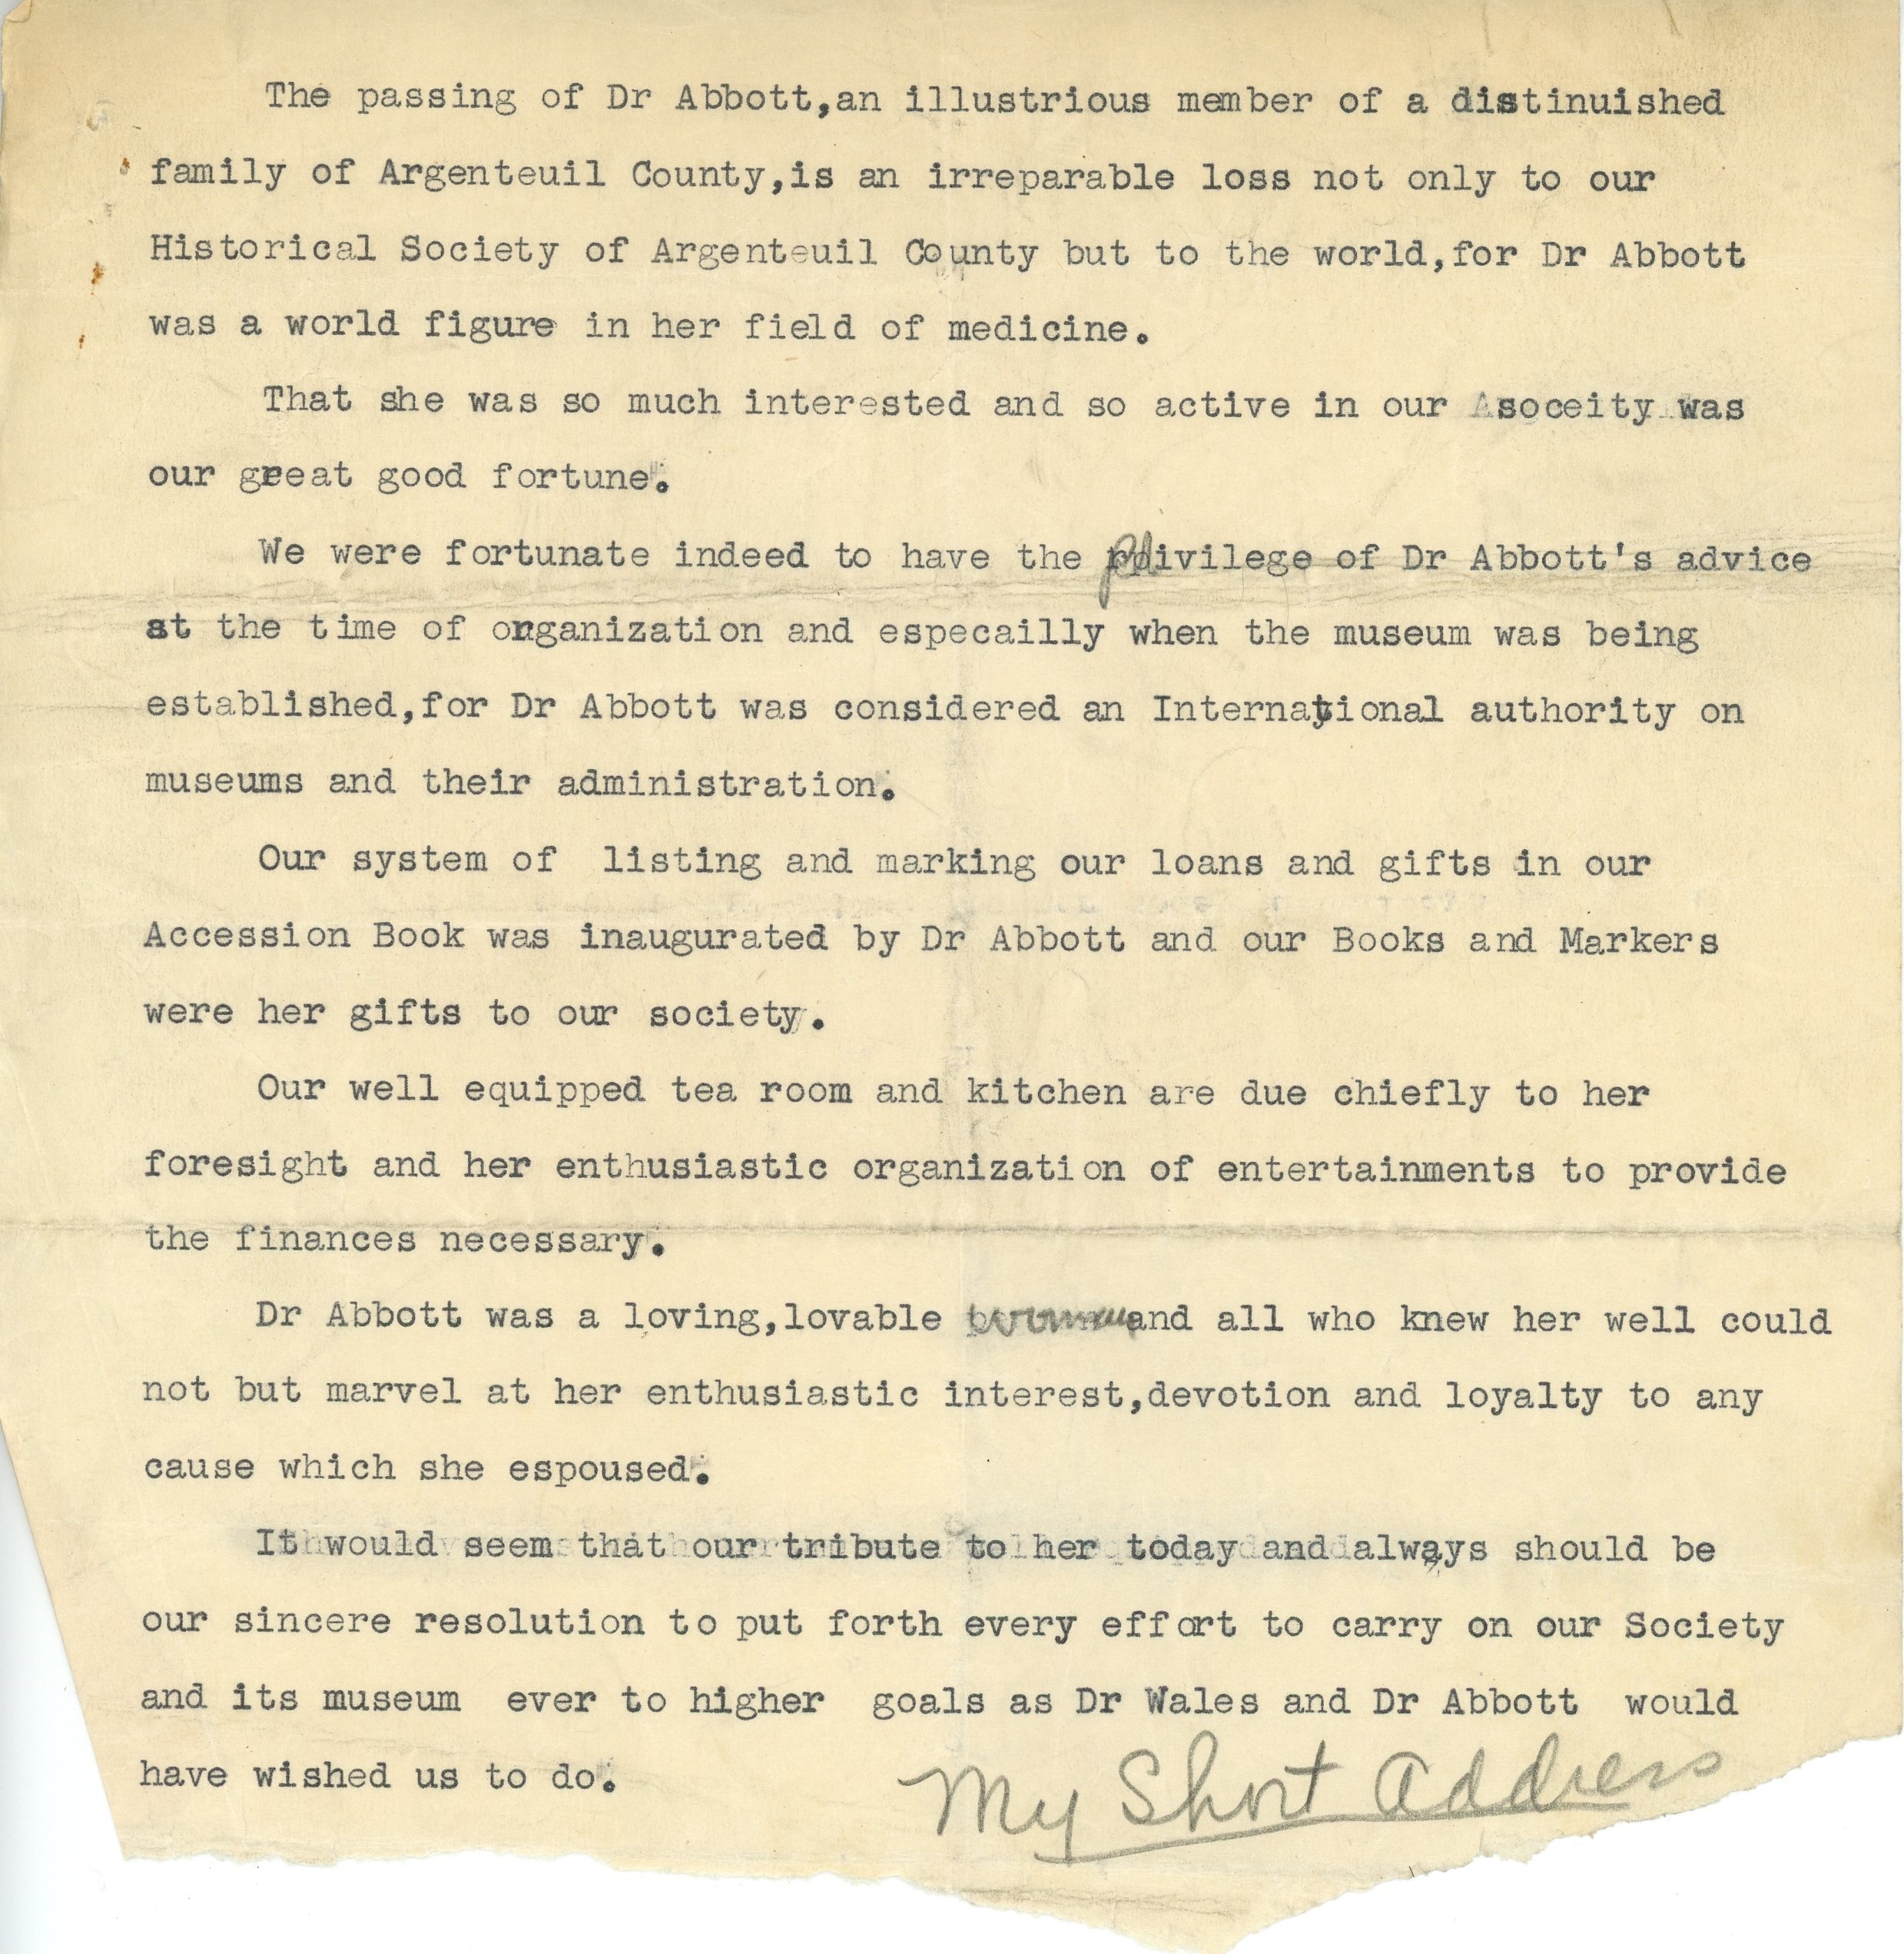 Typewritten note by Dr. Cushing, black ink on sepia paper, 1940. Following Maude Abbott’s death, he paid tribute to her and listed her contributions to the Historical Society of Argenteuil County: her active interest, advice, artifact identification system, the tea room and kitchen.